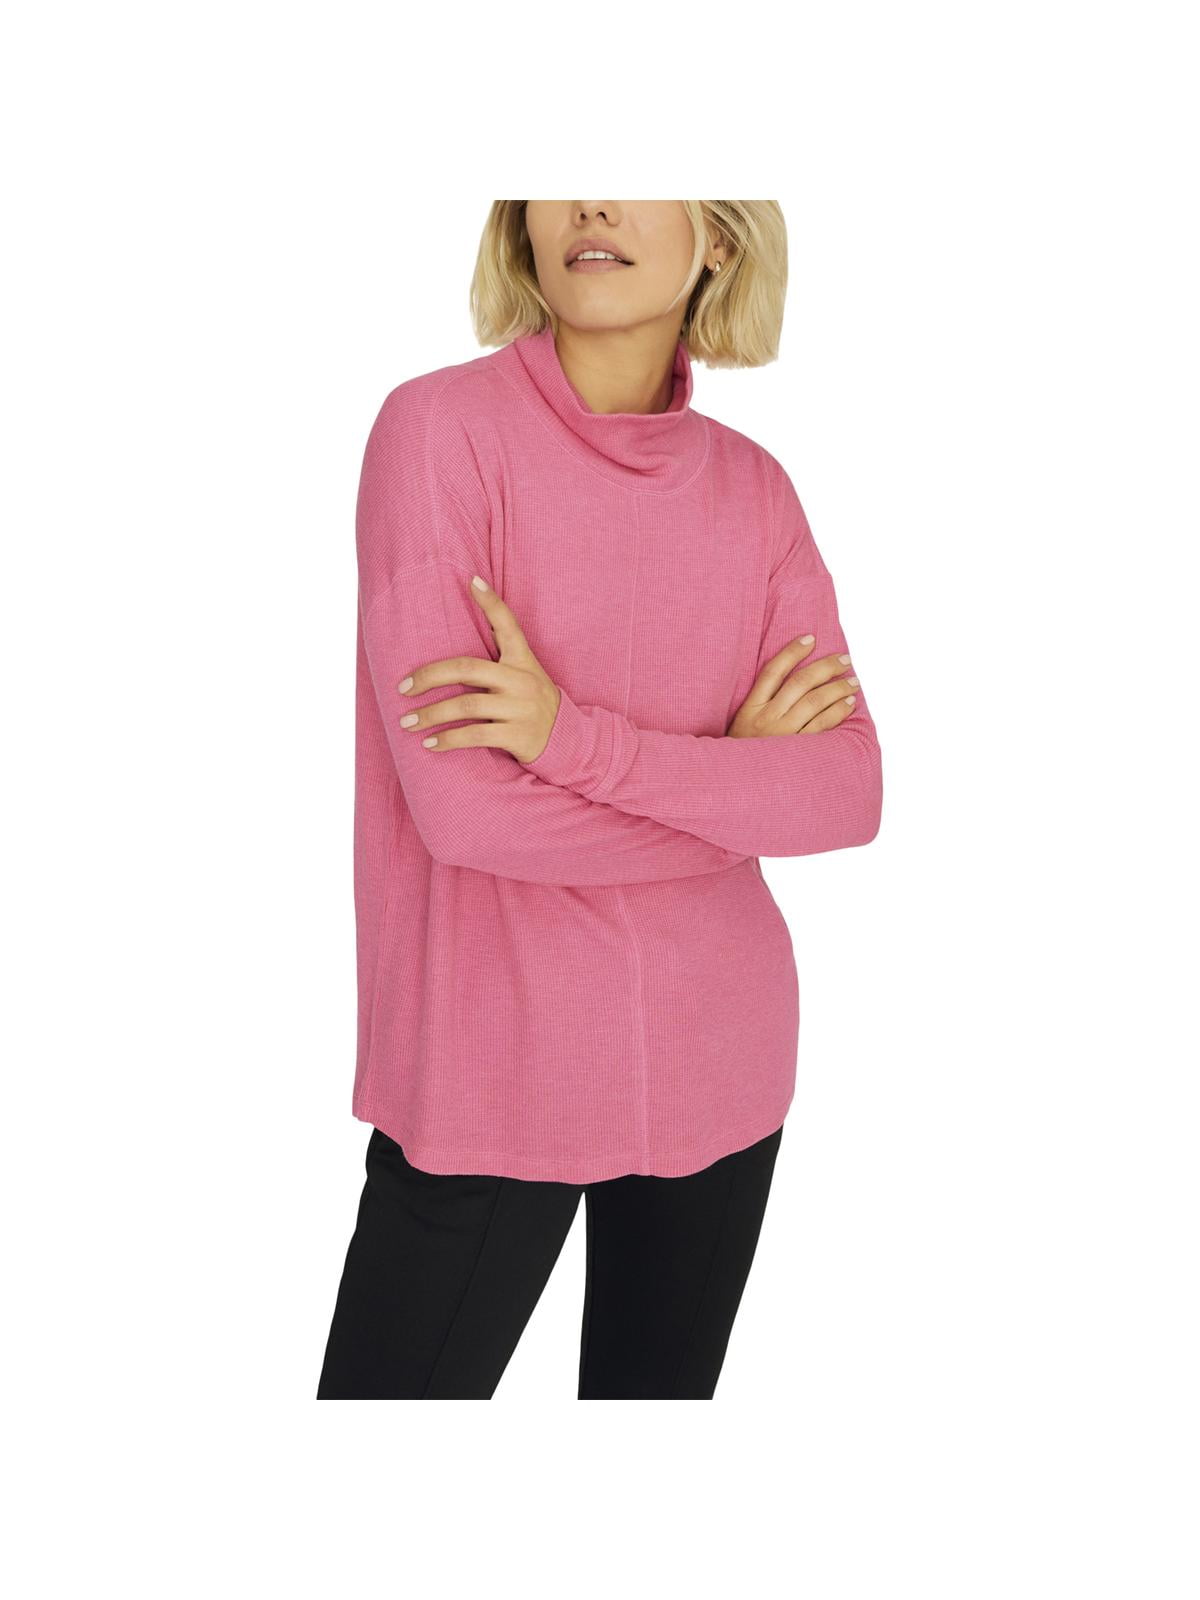 Sanctuary Womens Highroad Thermal Tee